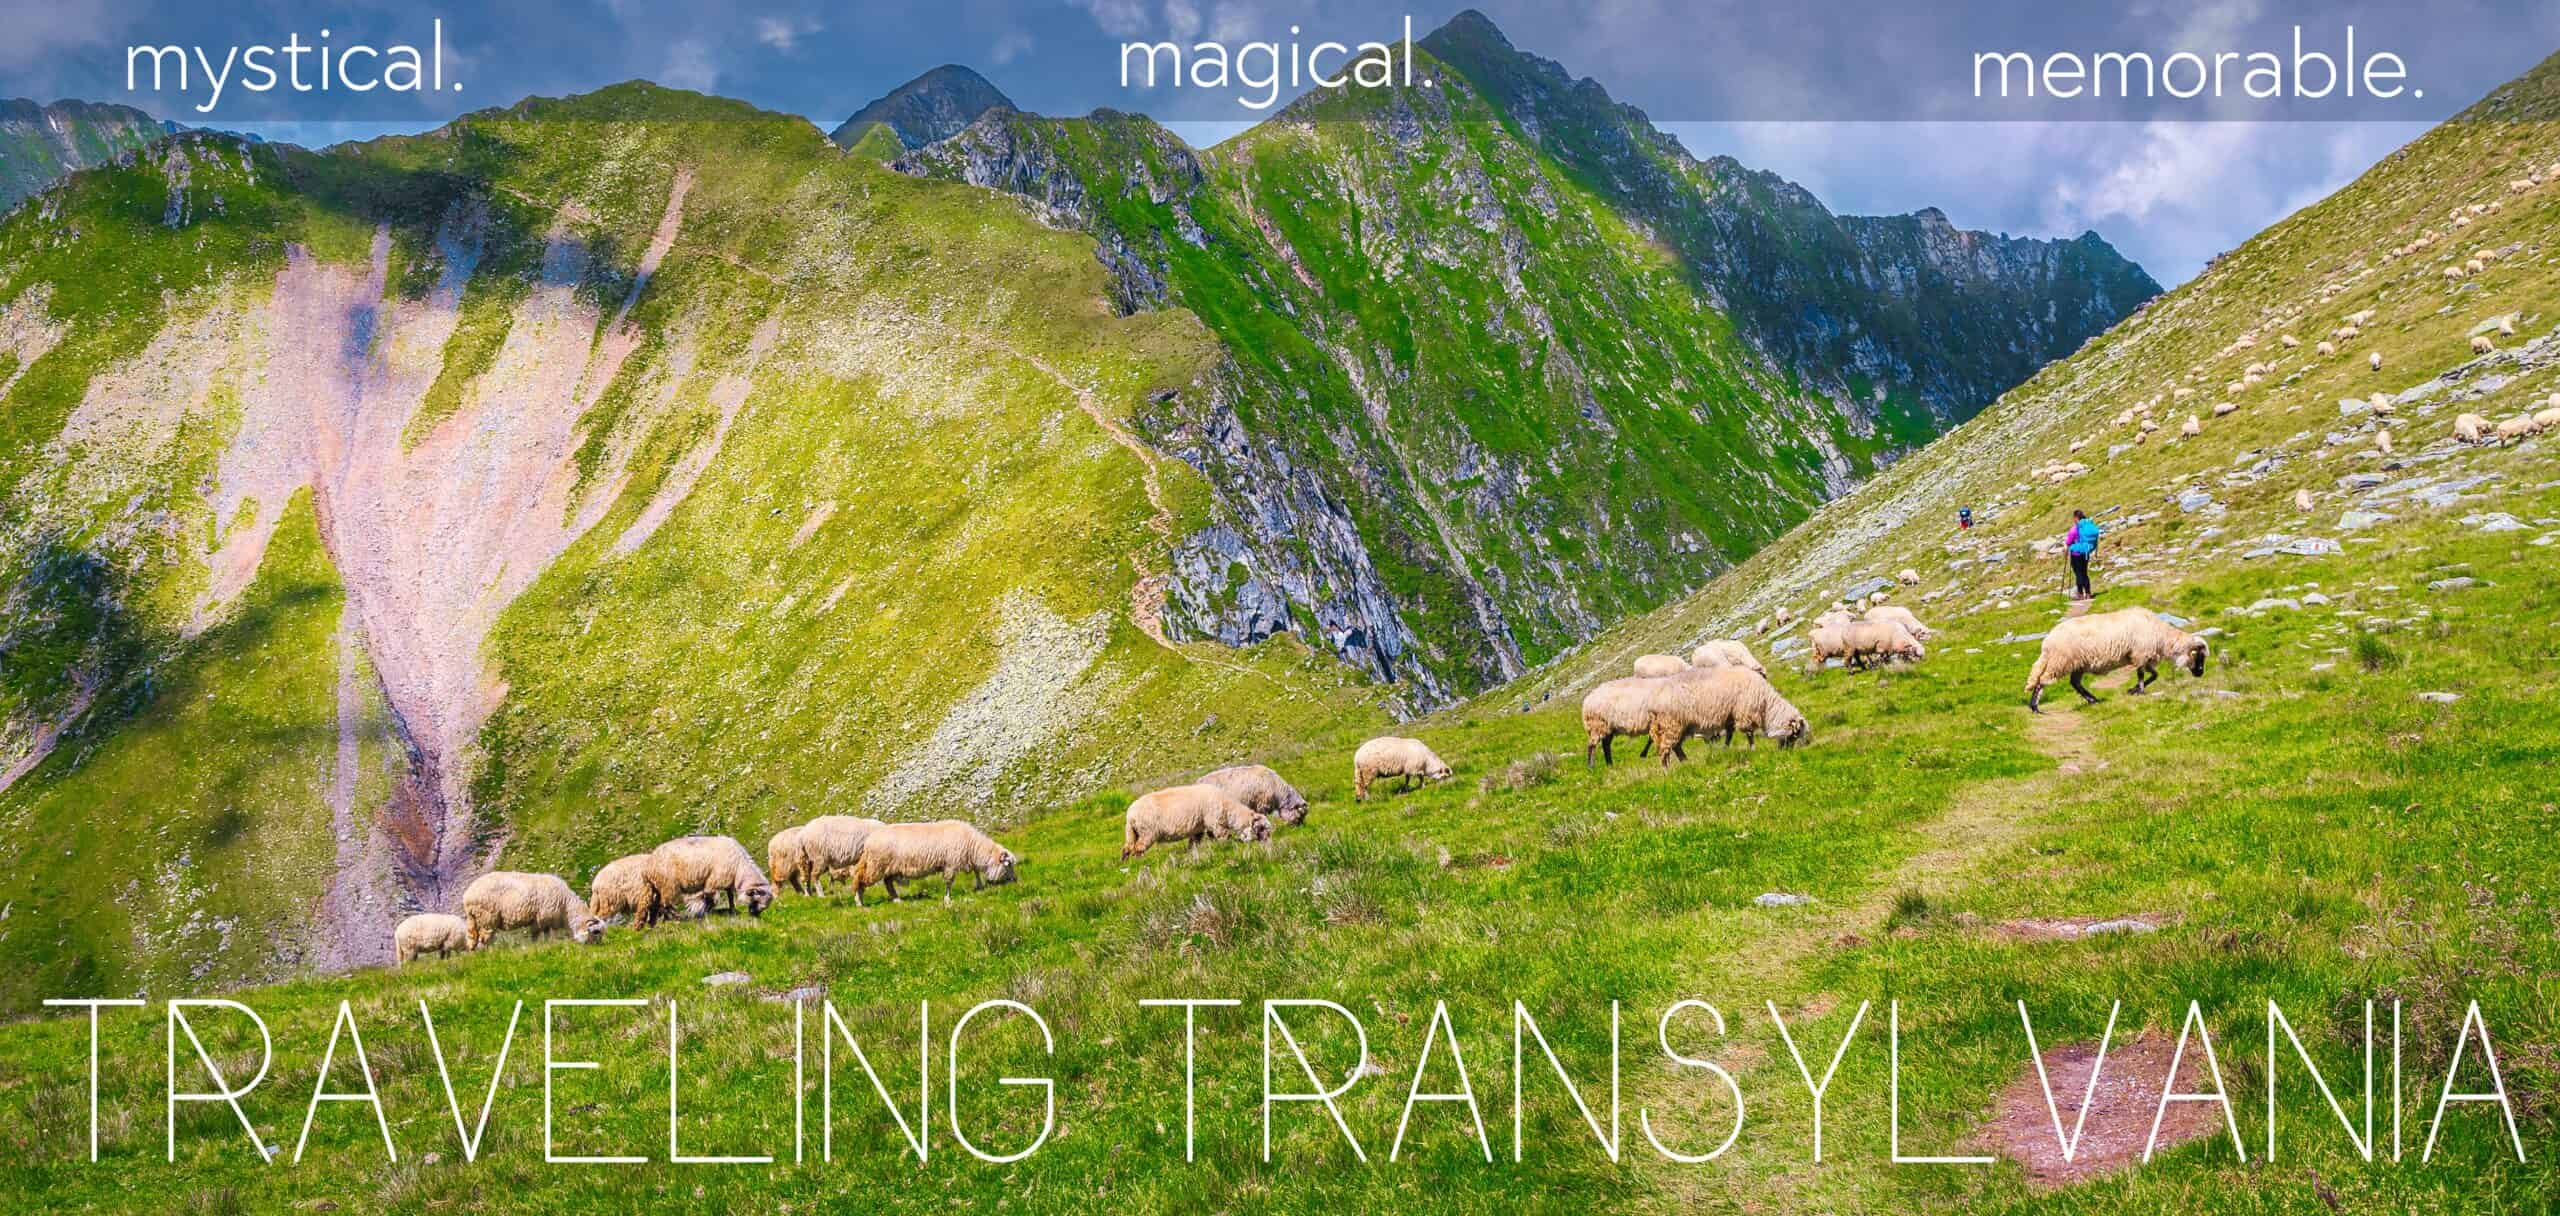 Forested area of Transylvania in front of a meadow with a flock of sheep. Text overlaid - mythical. magical. memorable. Traveling Transylvania.